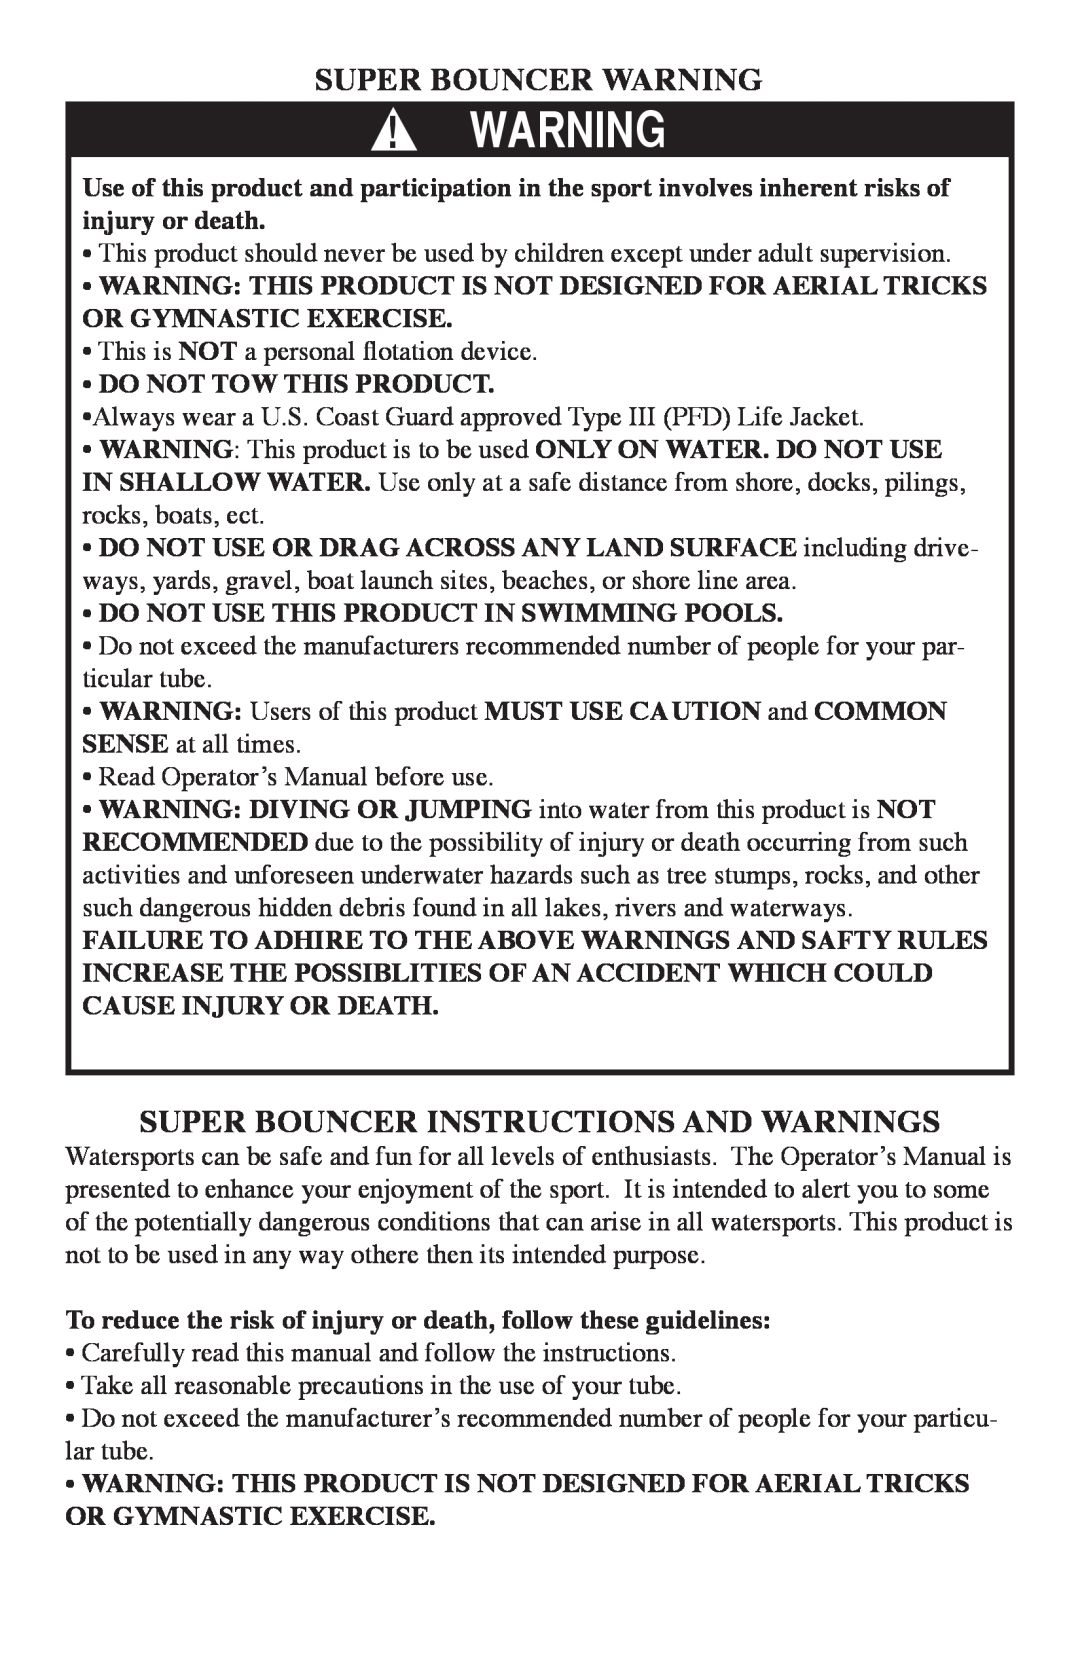 O'Brien 2101512, 2101522, 2101523 Super Bouncer Warning, Super Bouncer Instructions And Warnings, Do Not Tow This Product 